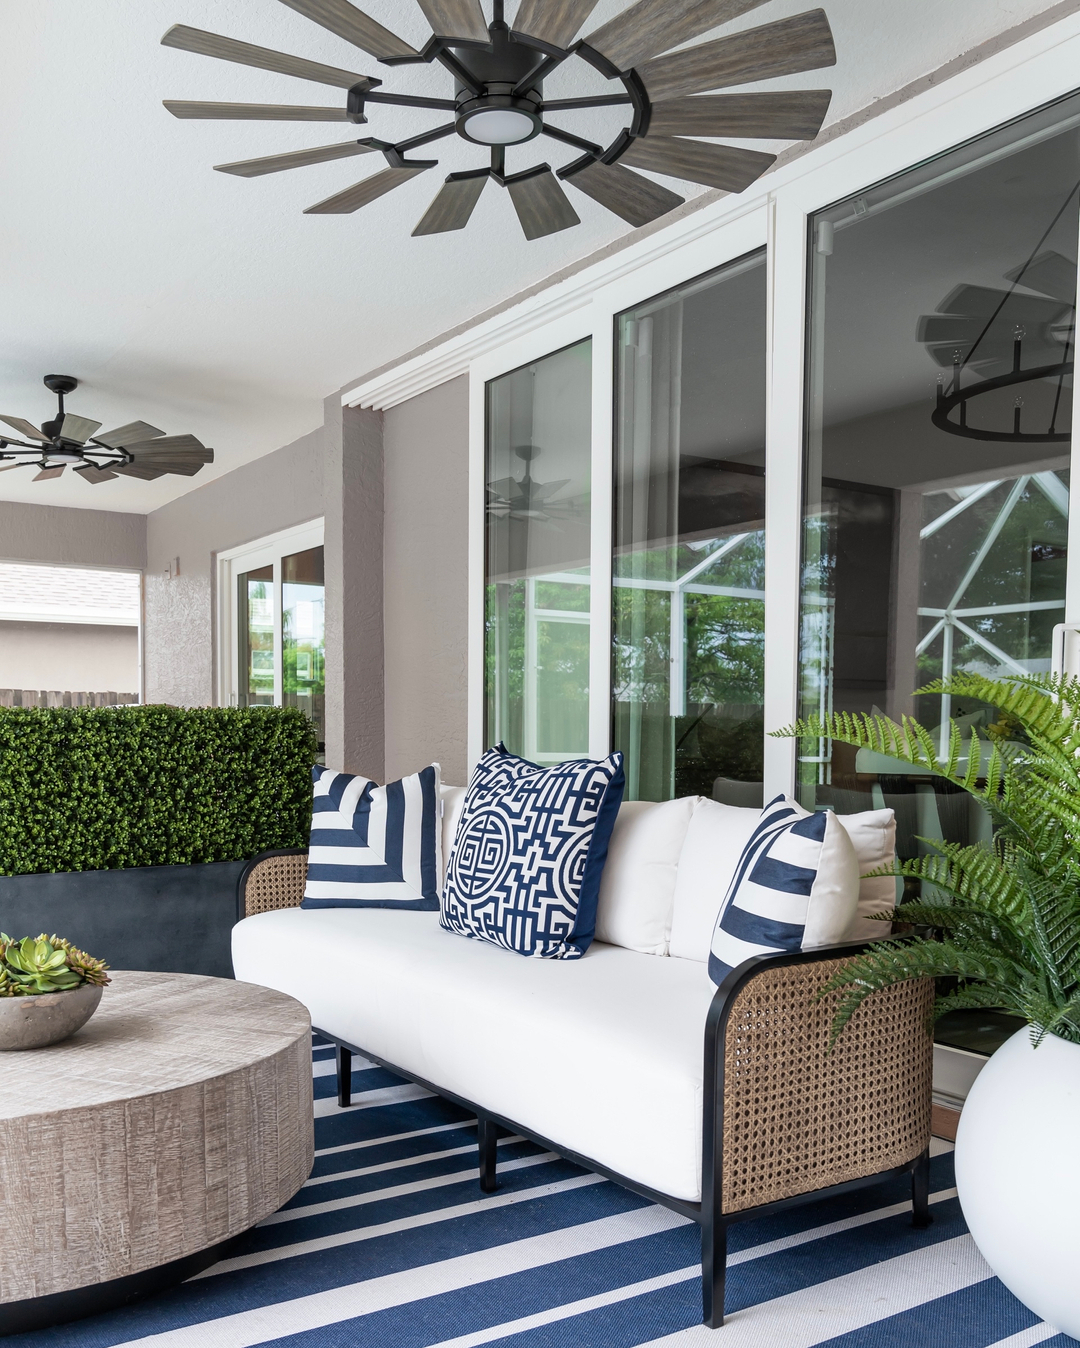 A covered backyard patio decorated with neutral colors. Photo by Instagram user @islandhome_interiors